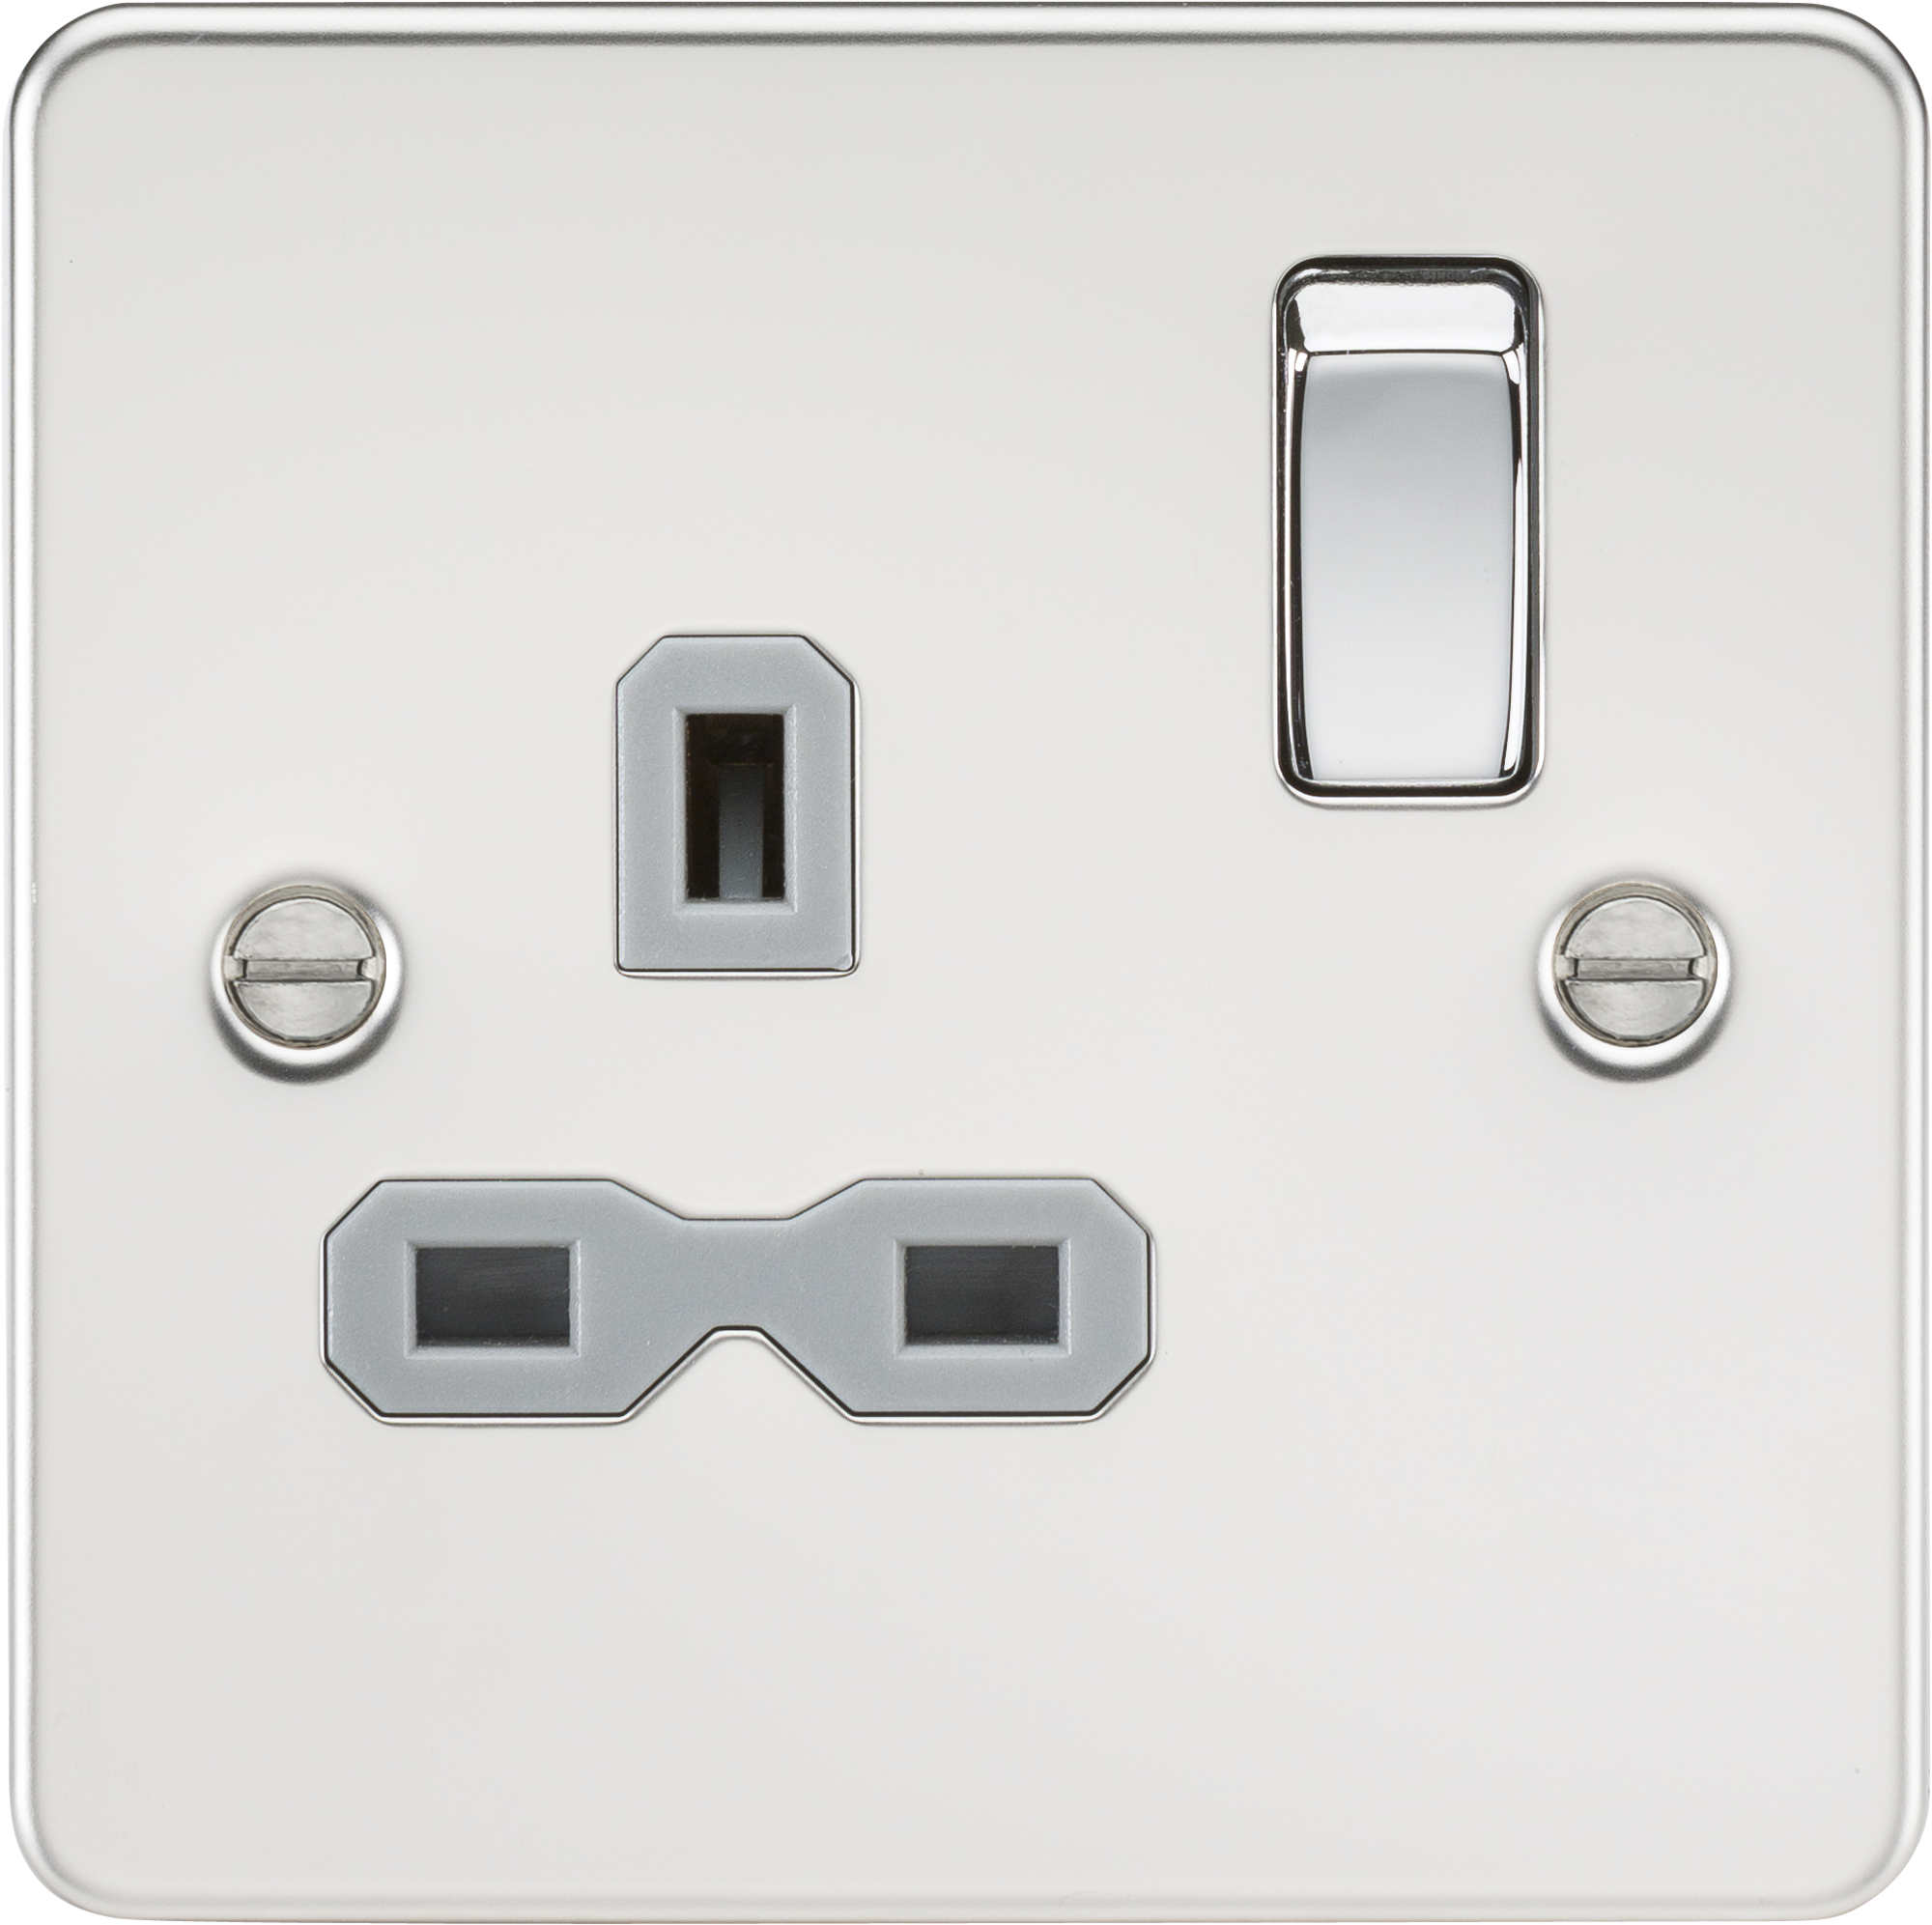 Flat Plate 13A 1G DP Switched Socket - Polished Chrome With Grey Insert - FPR7000PCG 